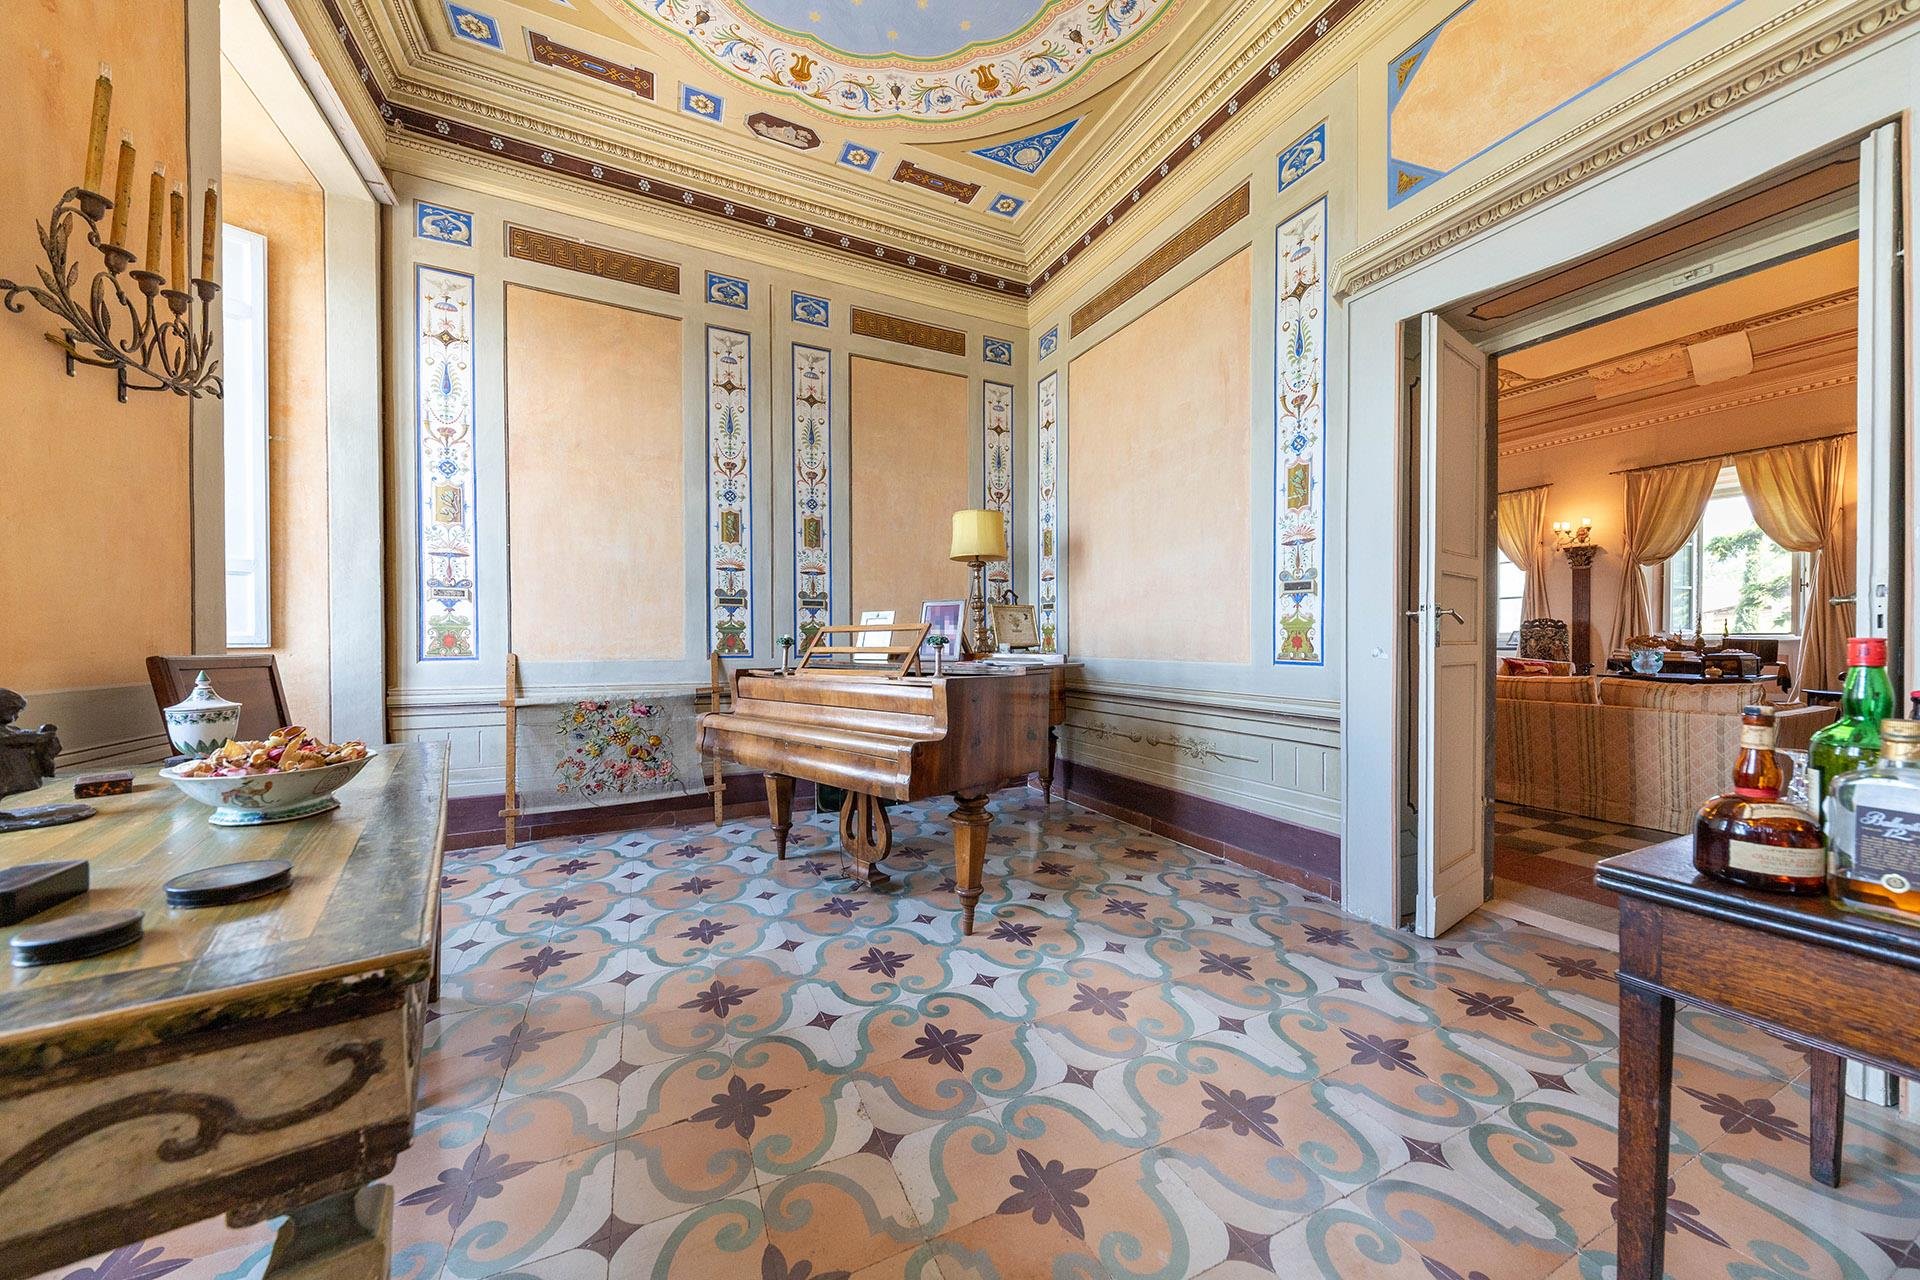 Francis York Historic Palazzo For Sale in Umbria, Italy Set in Private Park 9.jpg